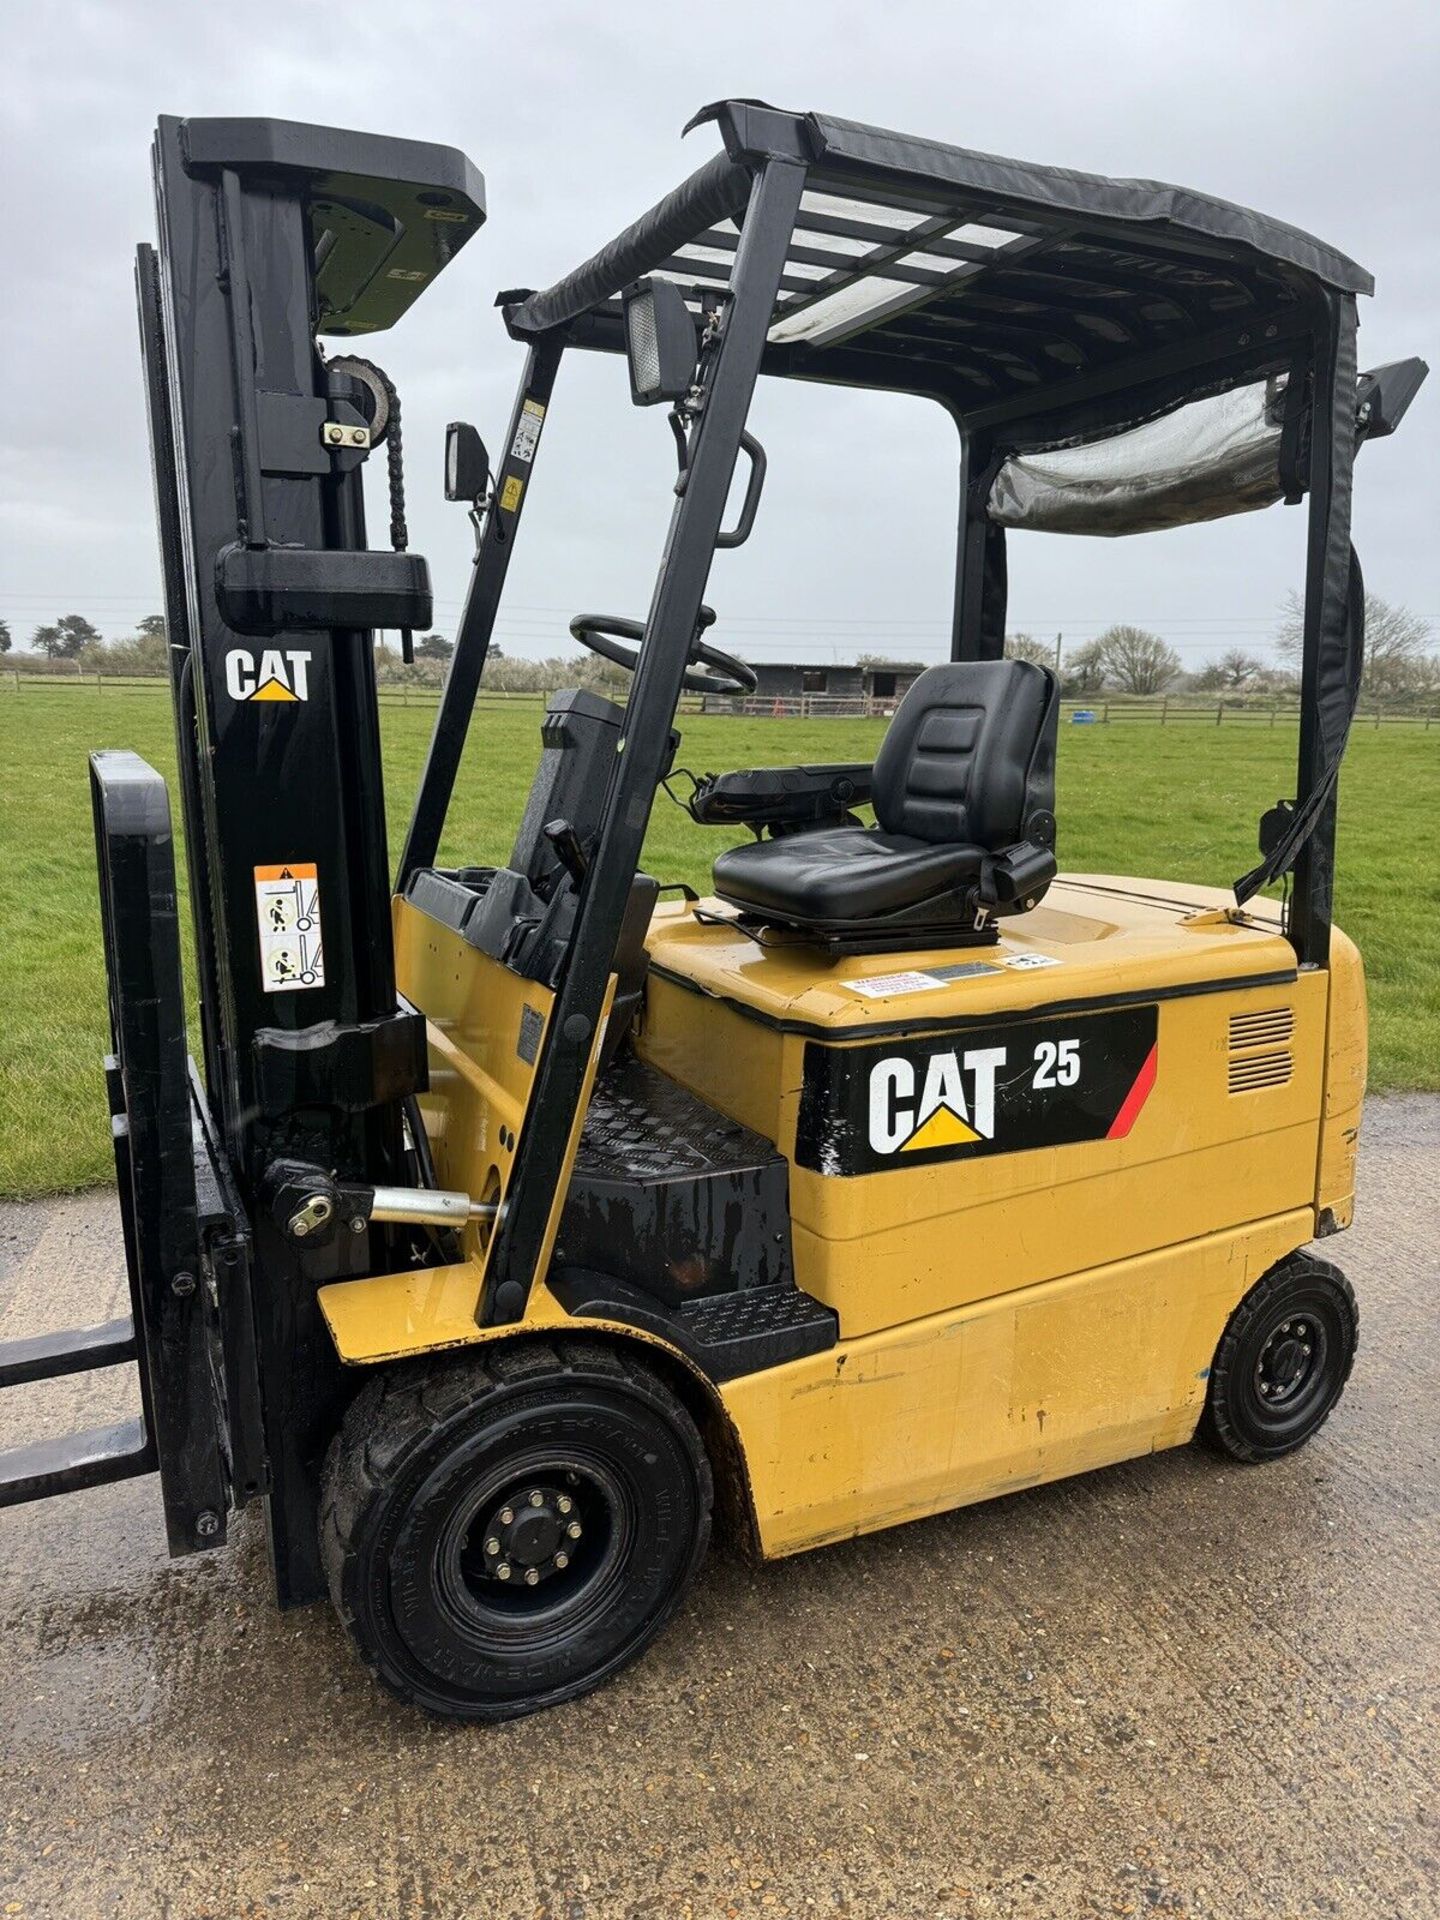 CATERPILLAR, 2.5 Tonne Electric forklift Truck (Container Spec) - Image 4 of 4